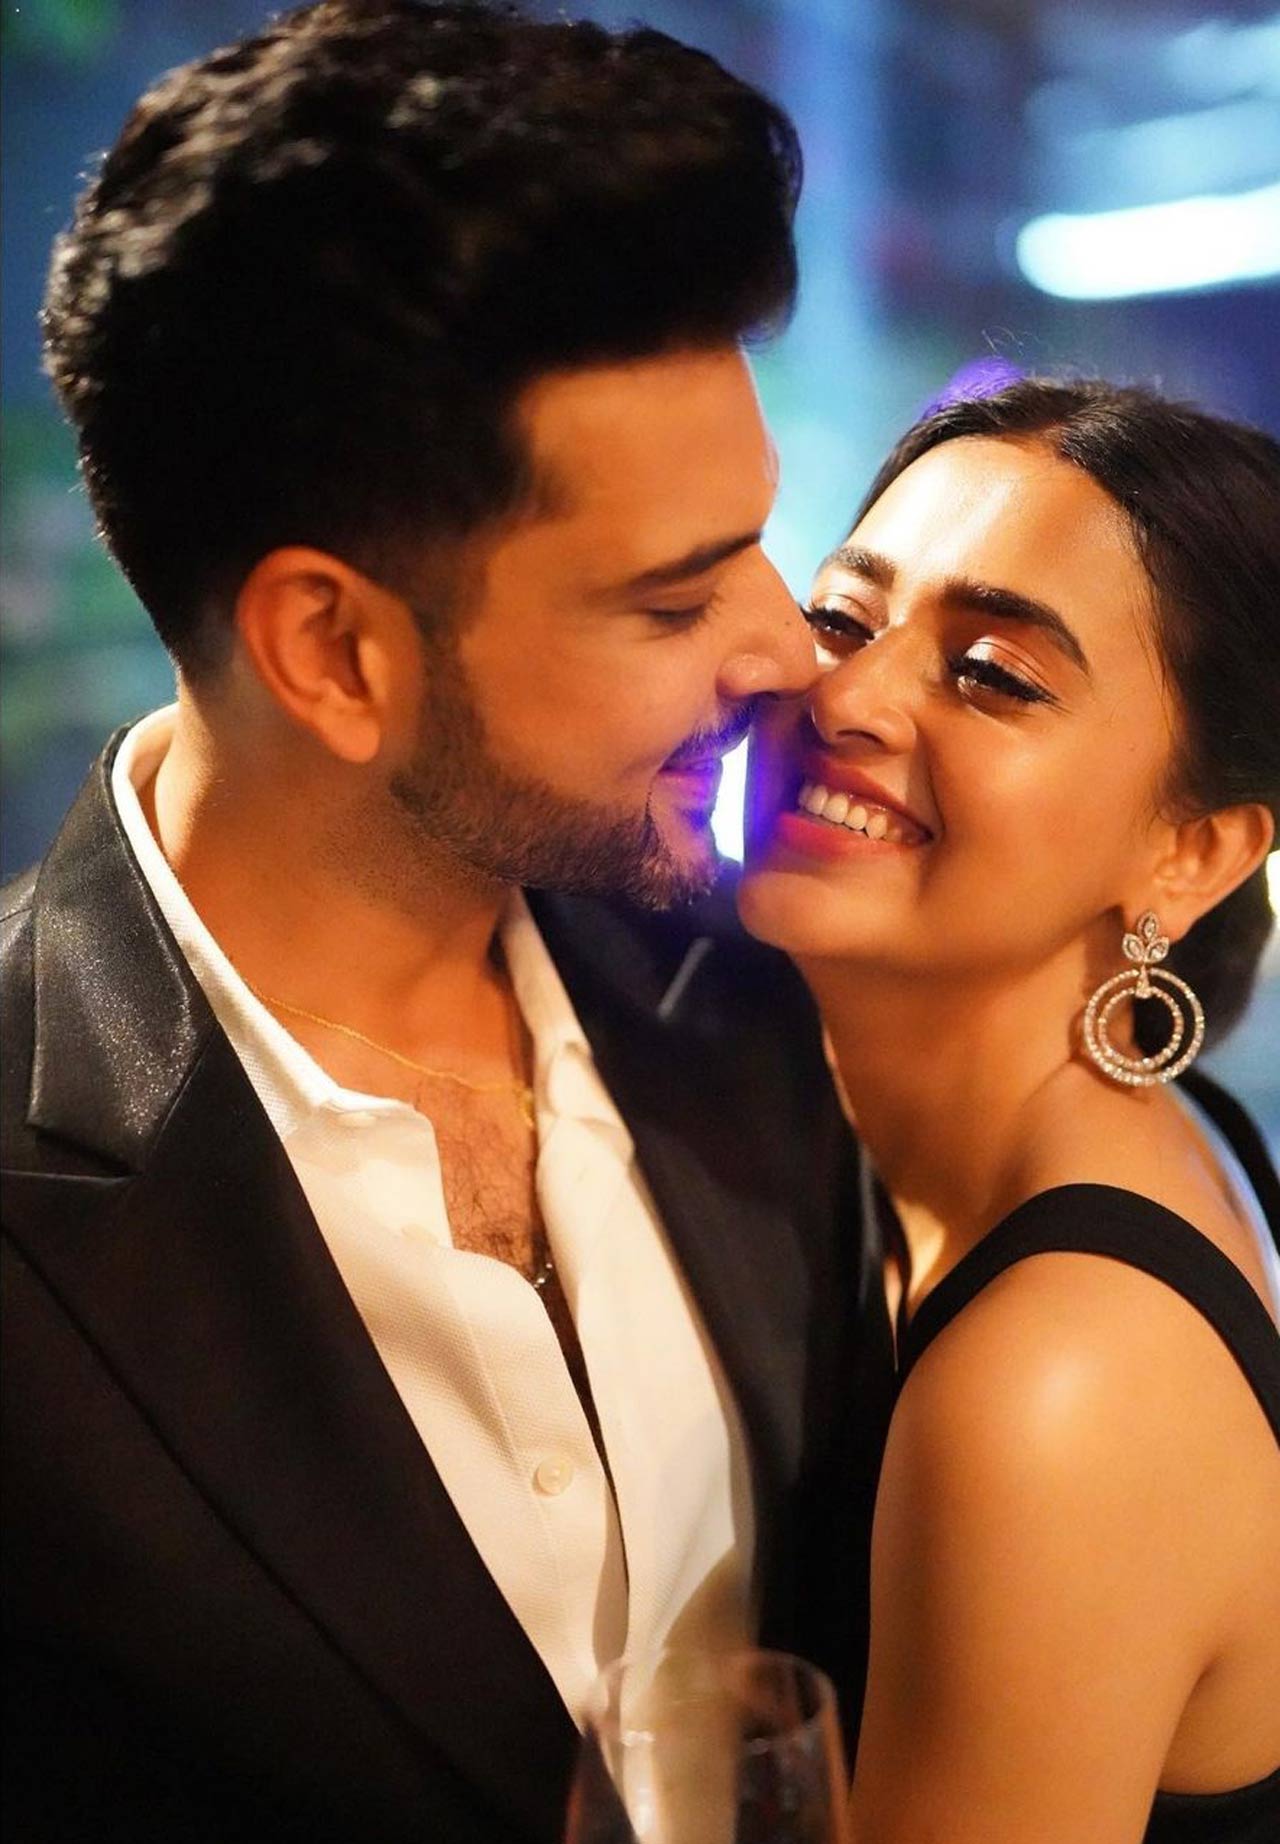 Tejasswi Prakash who rose to fame after her stint in the Bigg Bos 15 house, dropped a 'super-fun' video with her mother and her boyfriend, actor Karan Kundrra's mom on social media. While the internet couldn't get over it, the fun reel shared the 'dope' side of her mums